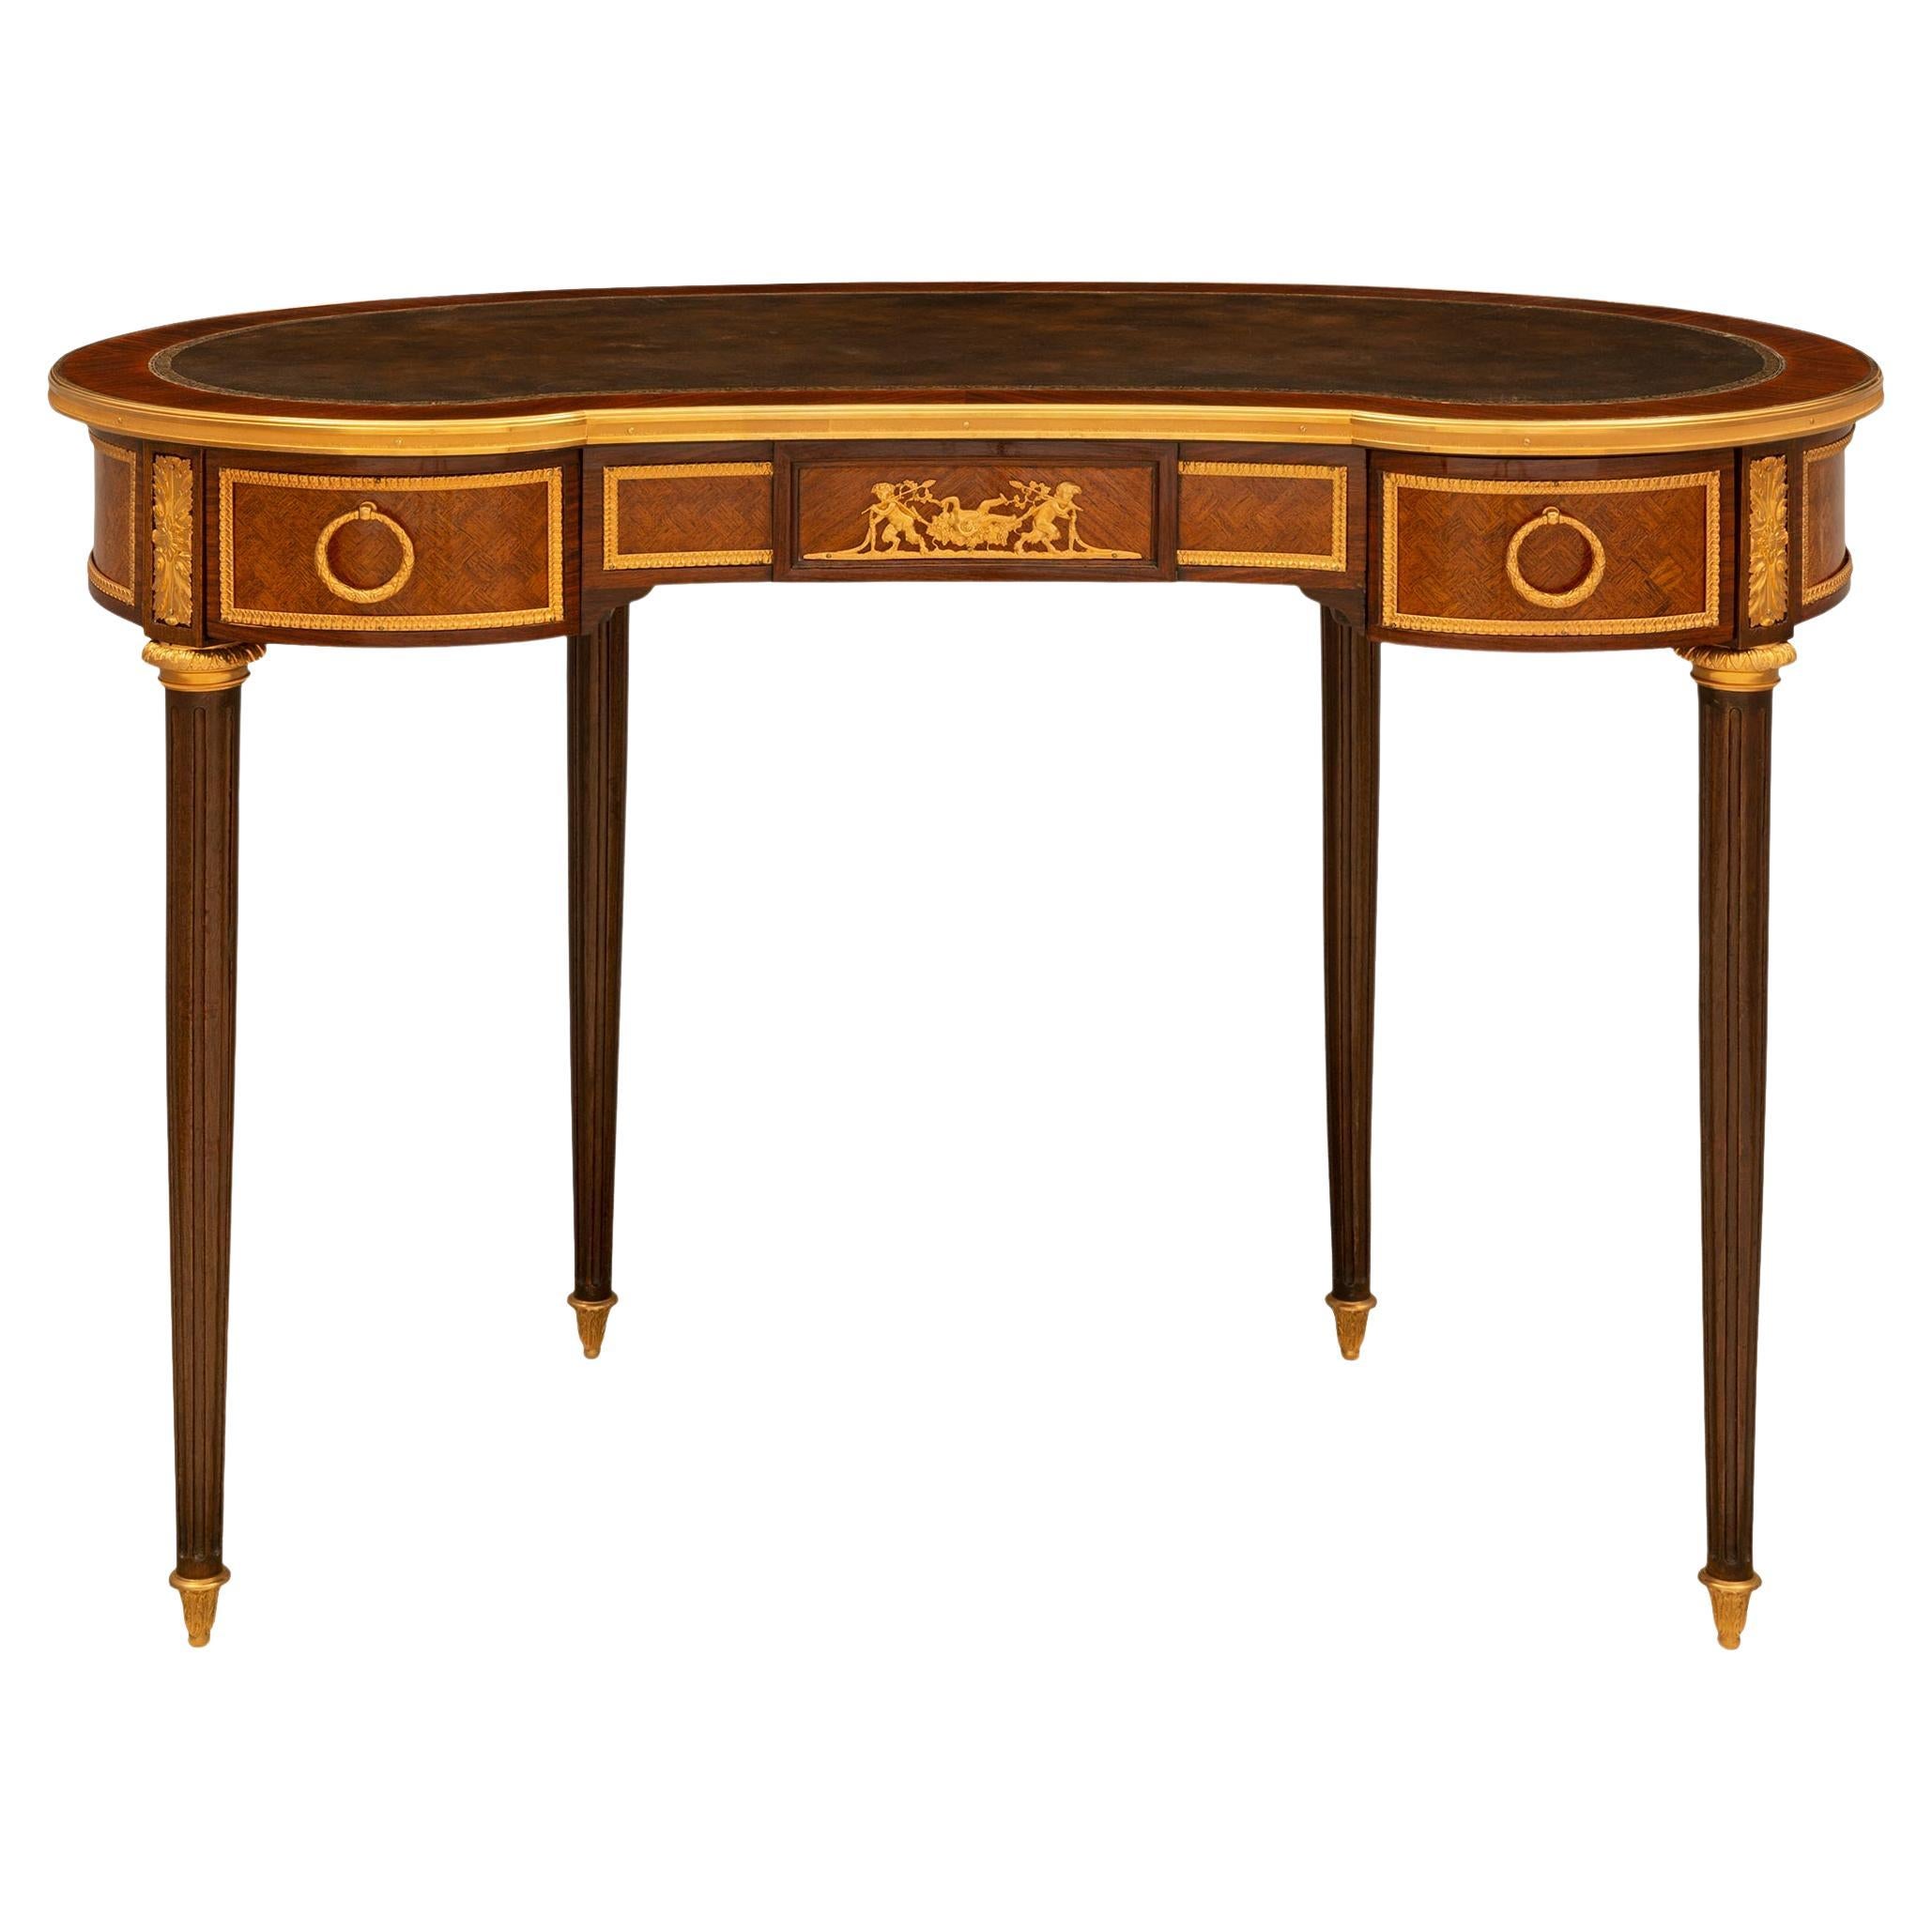 French 19th Century Tulipwood Parquetry Desk, Attributed to Linke